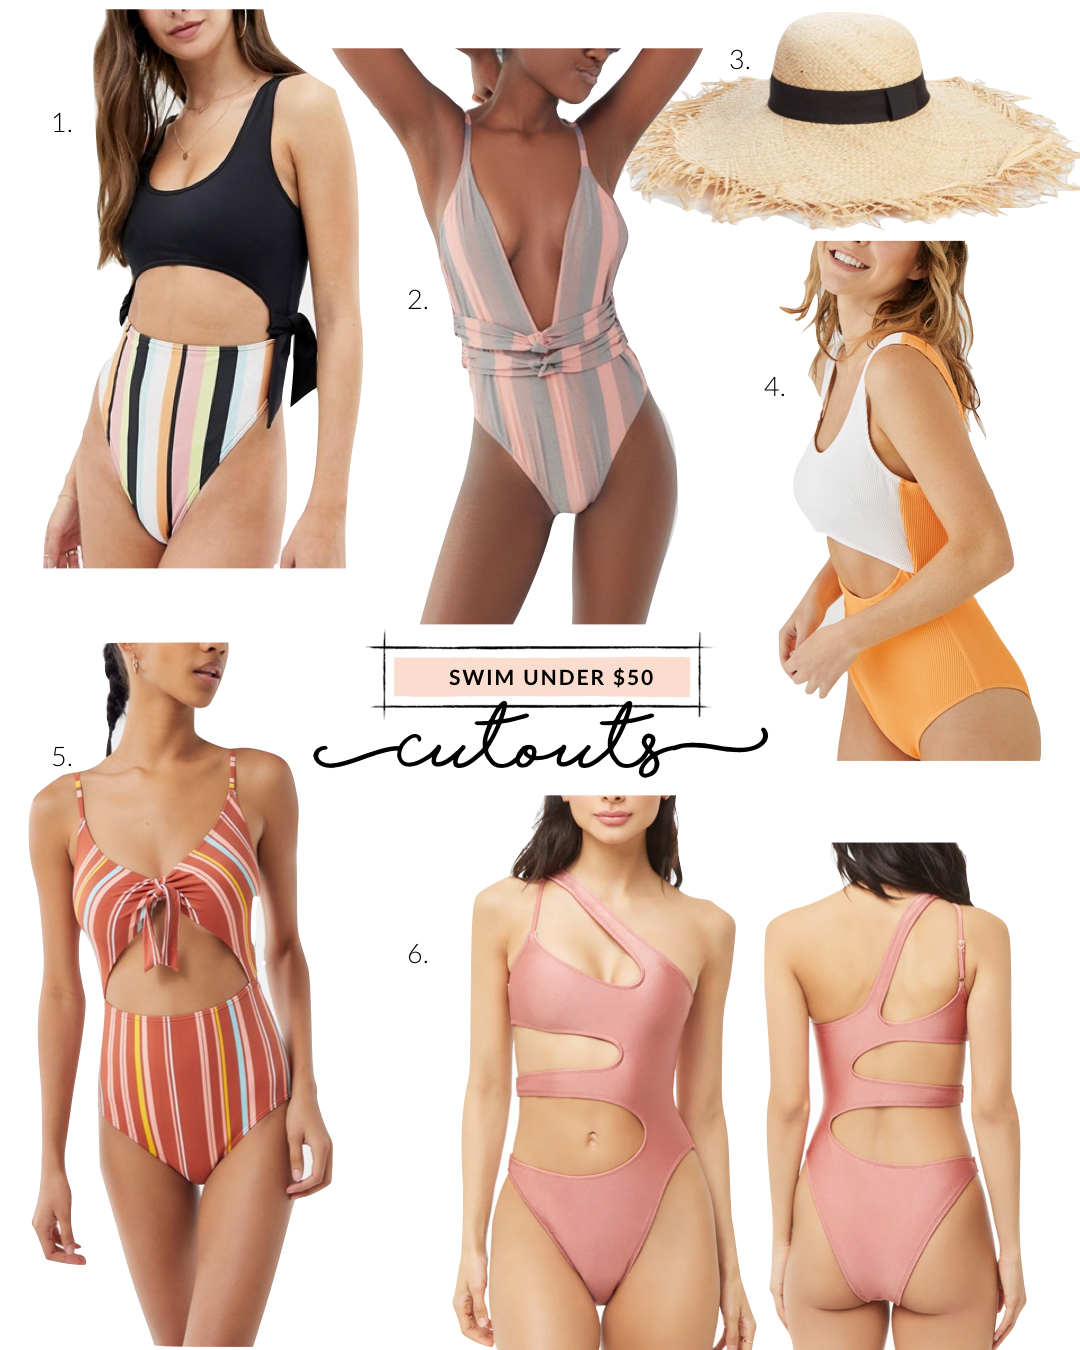 swimsuits for all - Gypsy Tan -Cutout Bikinis Swimsuits